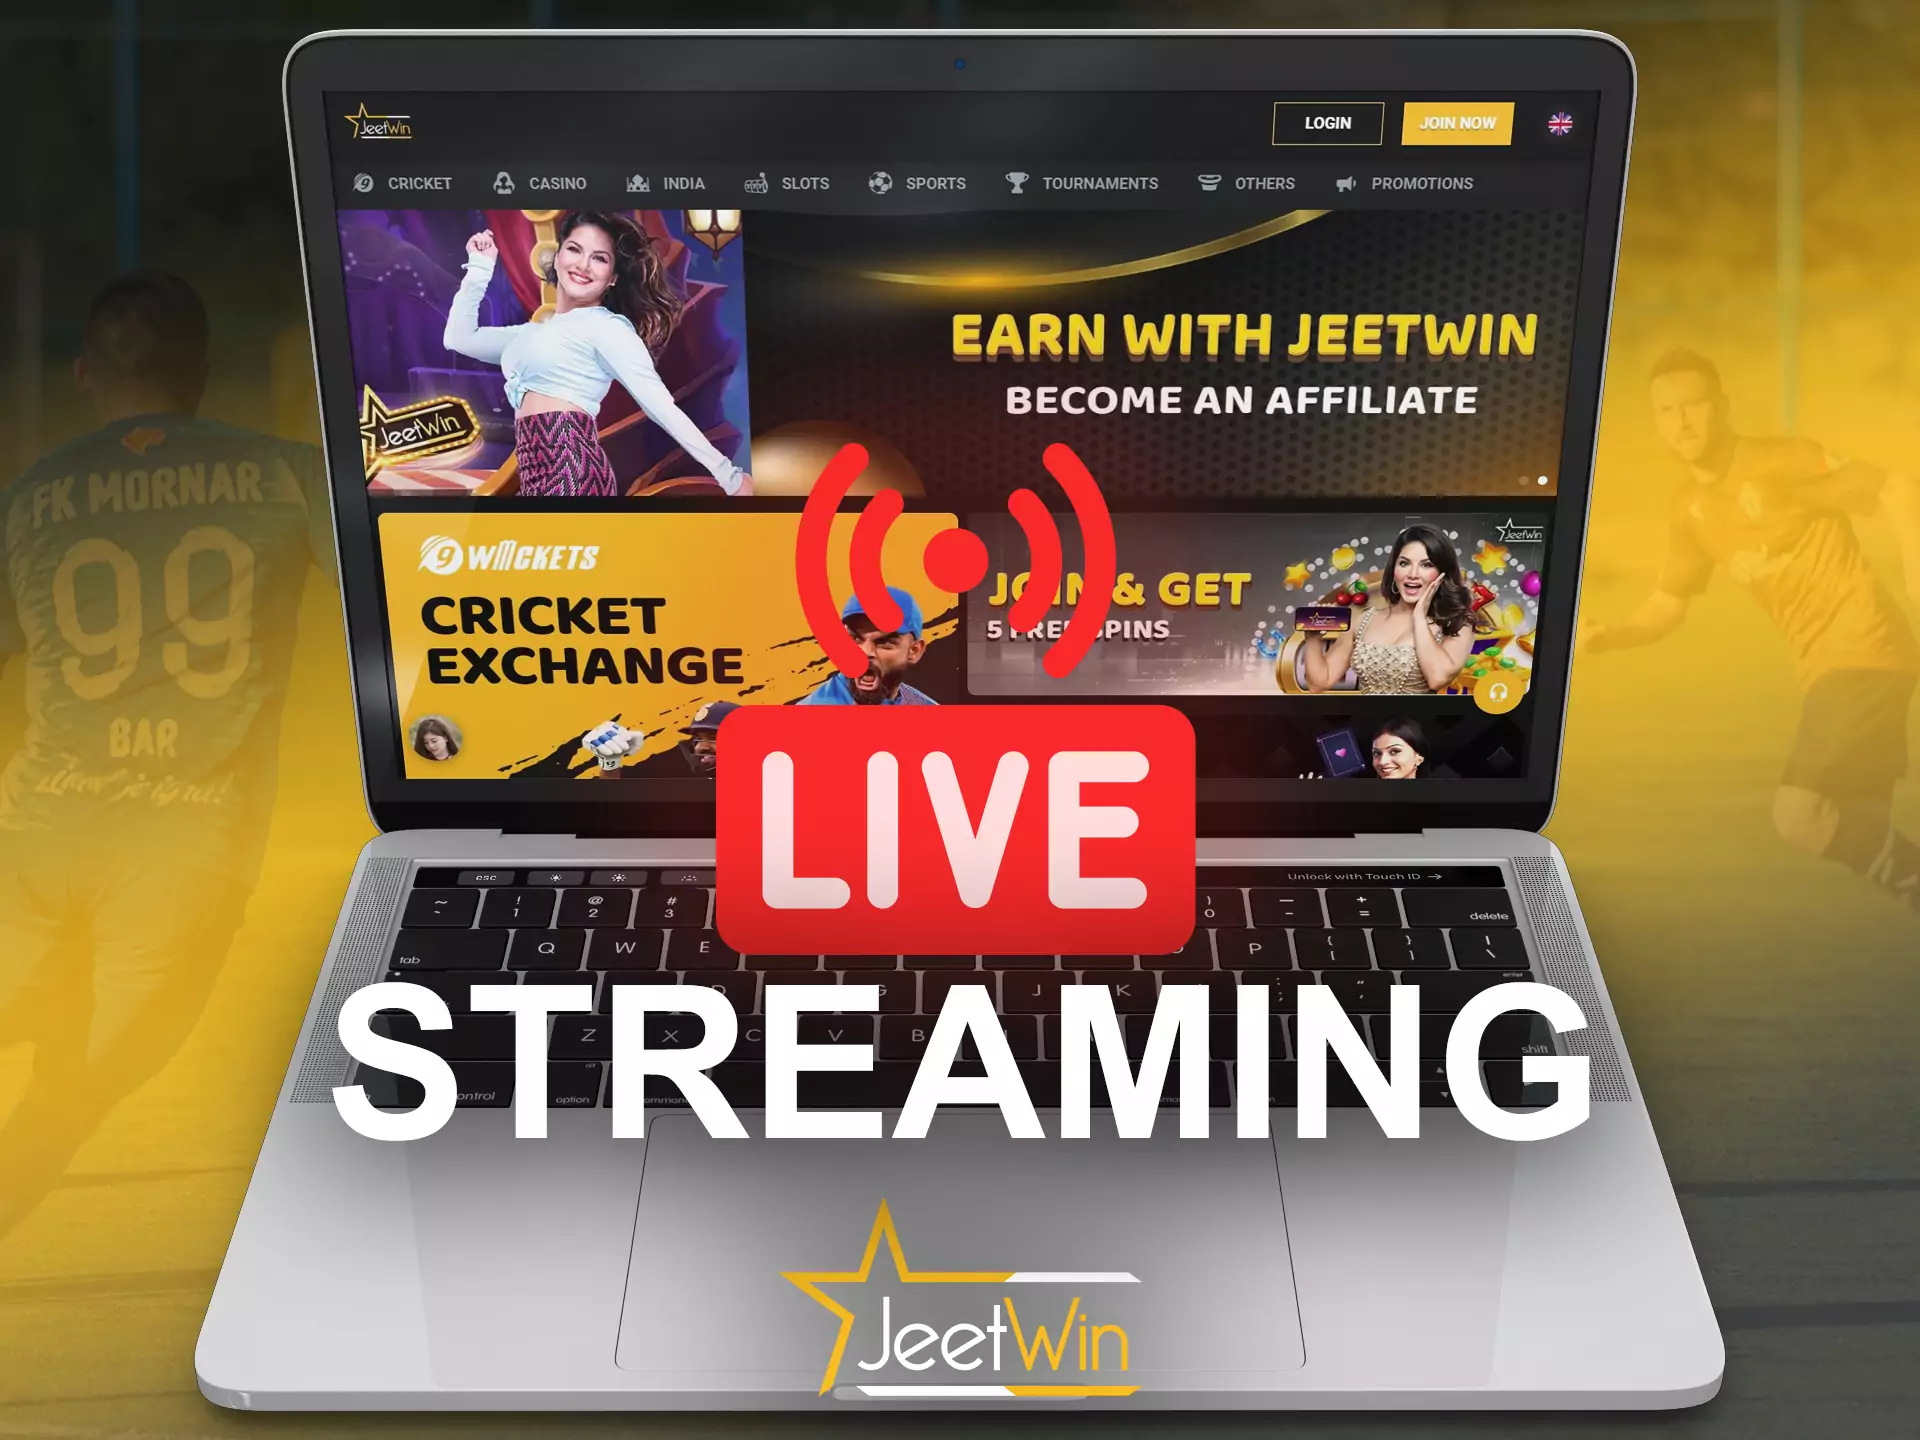 Watch live streaming with JeetWin.